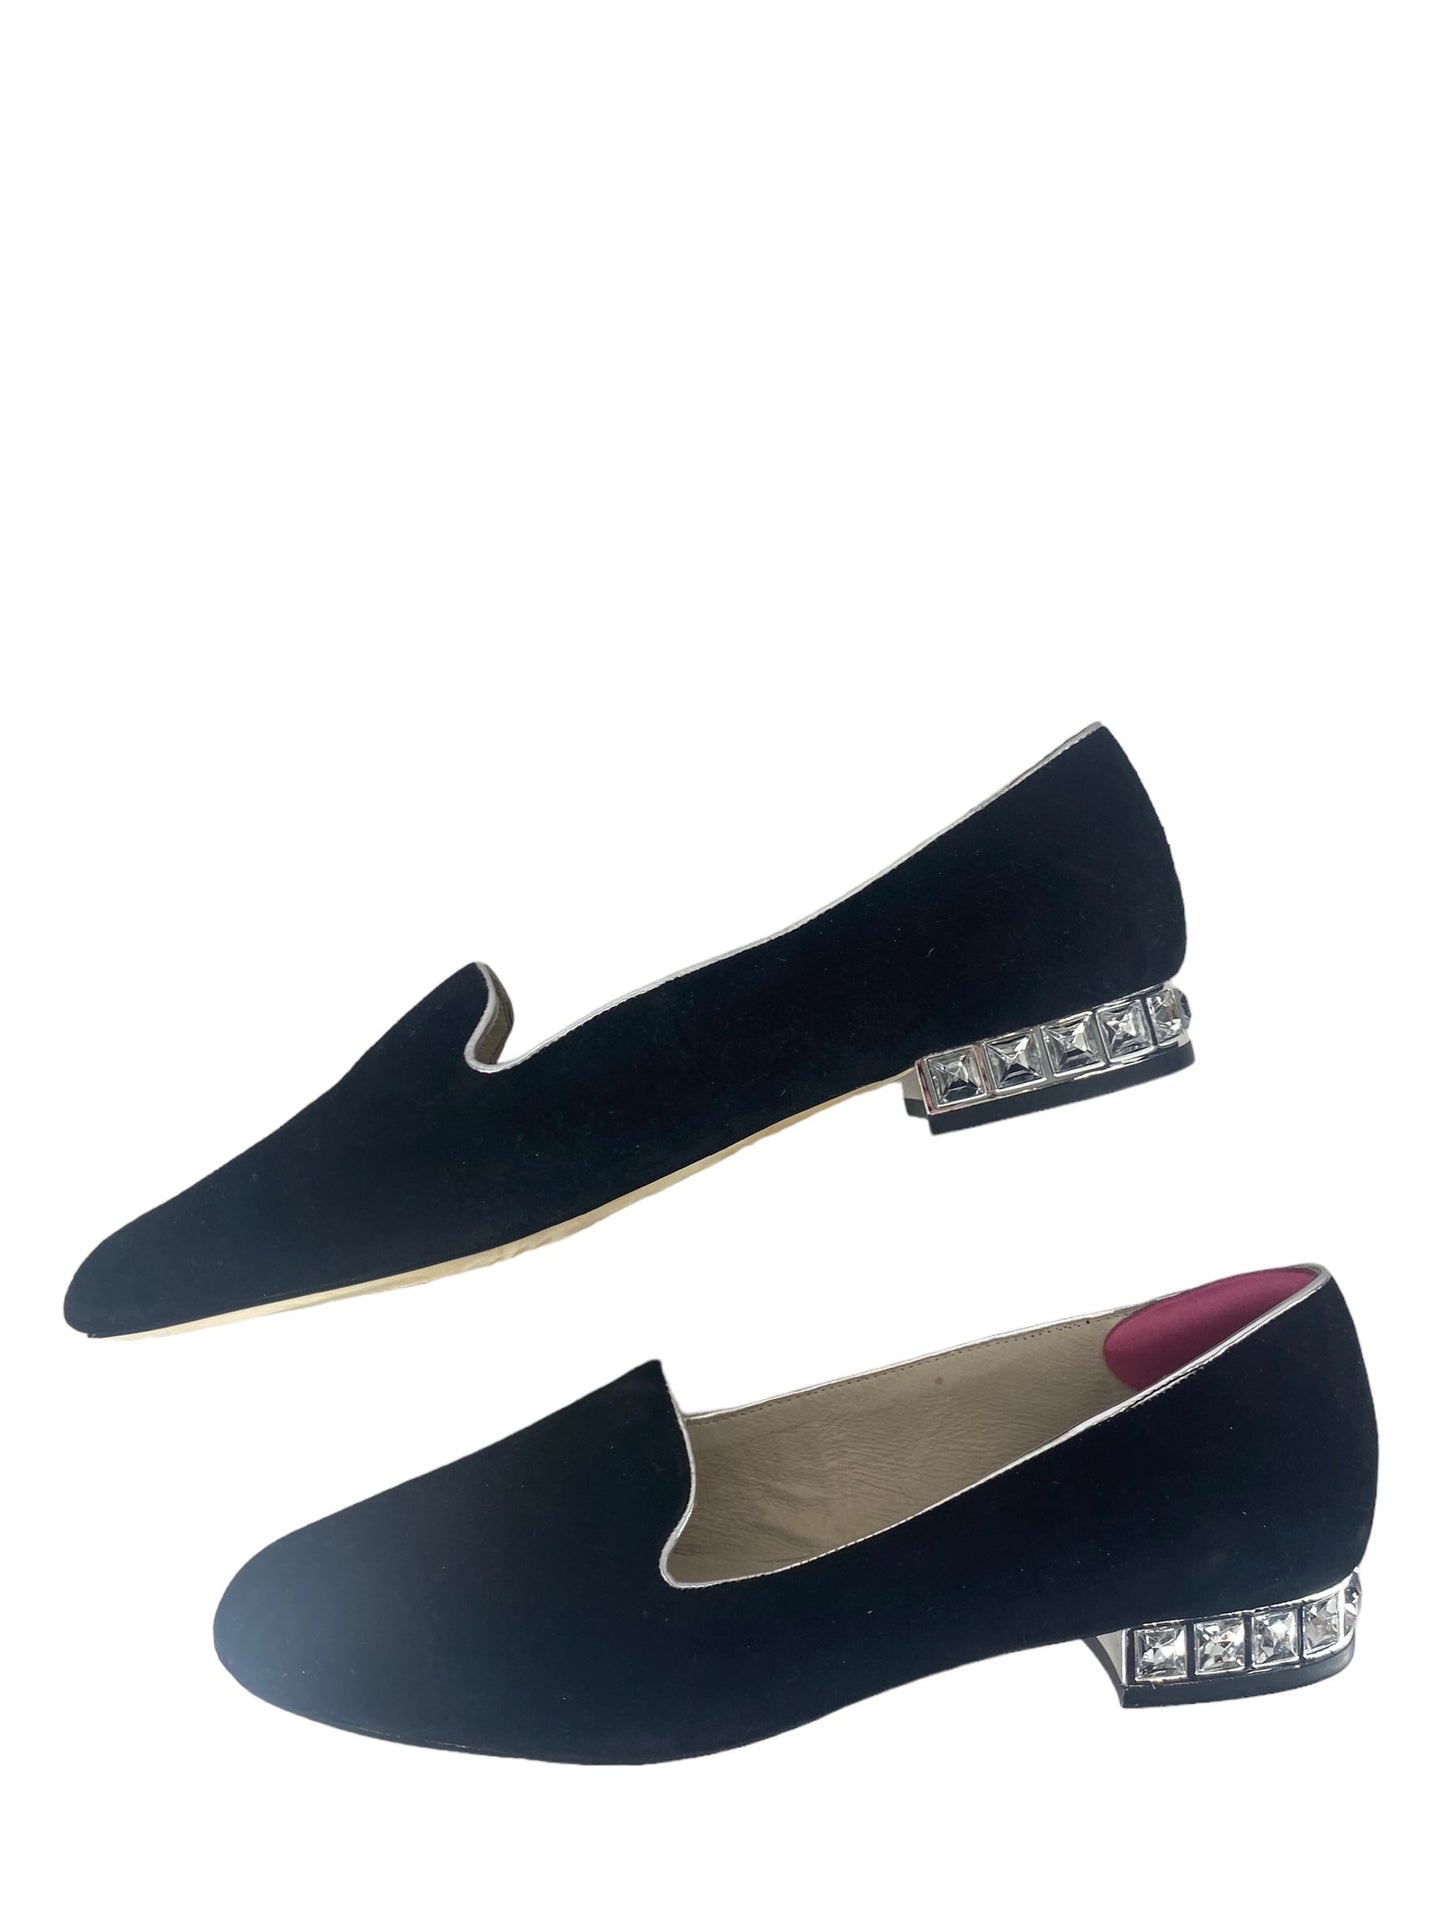 Shoes Flats Other By Michael Kors O  Size: 7.5